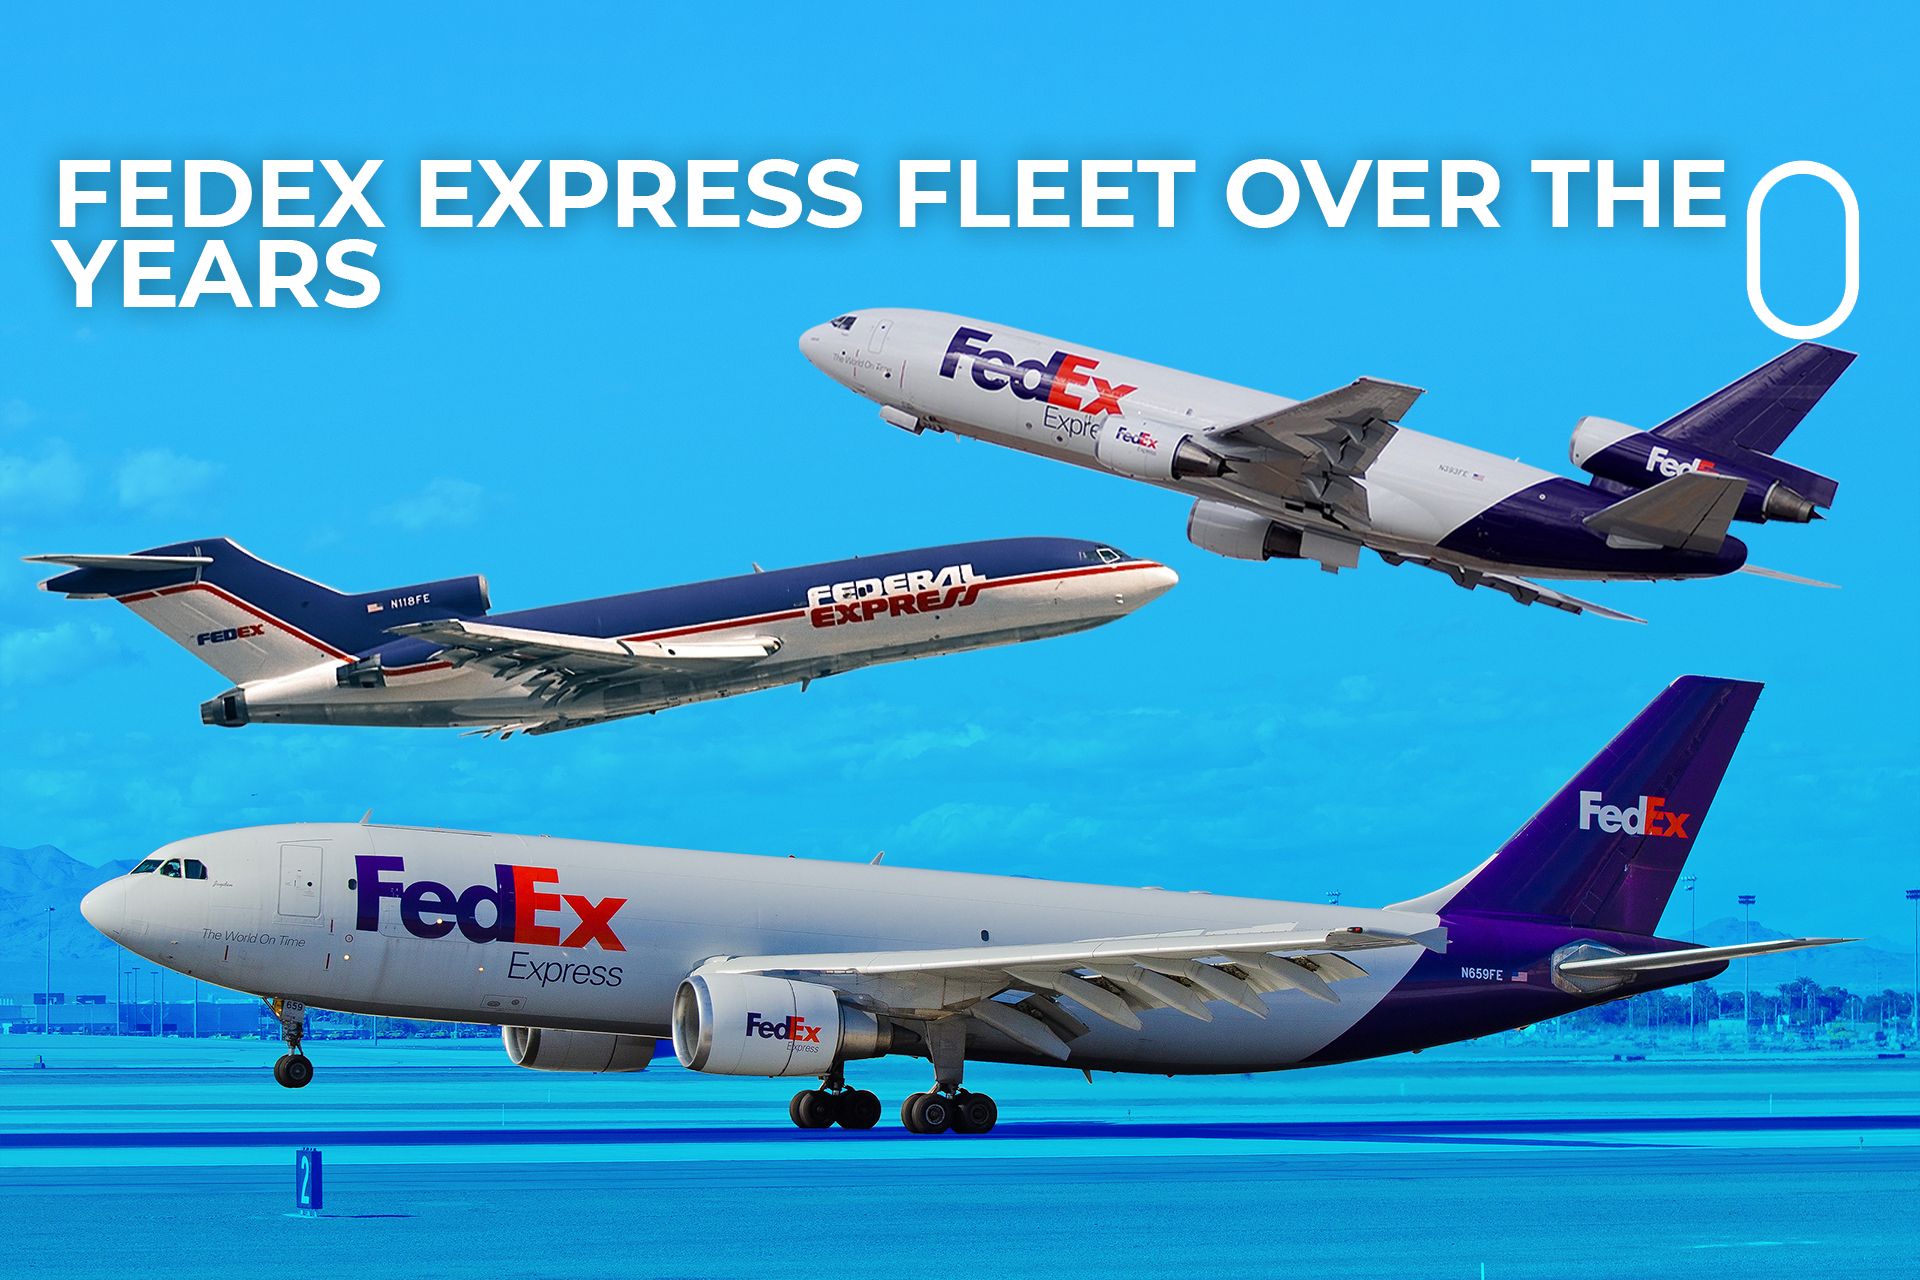 A Historical Look At The FedEx Fleet Over The Years